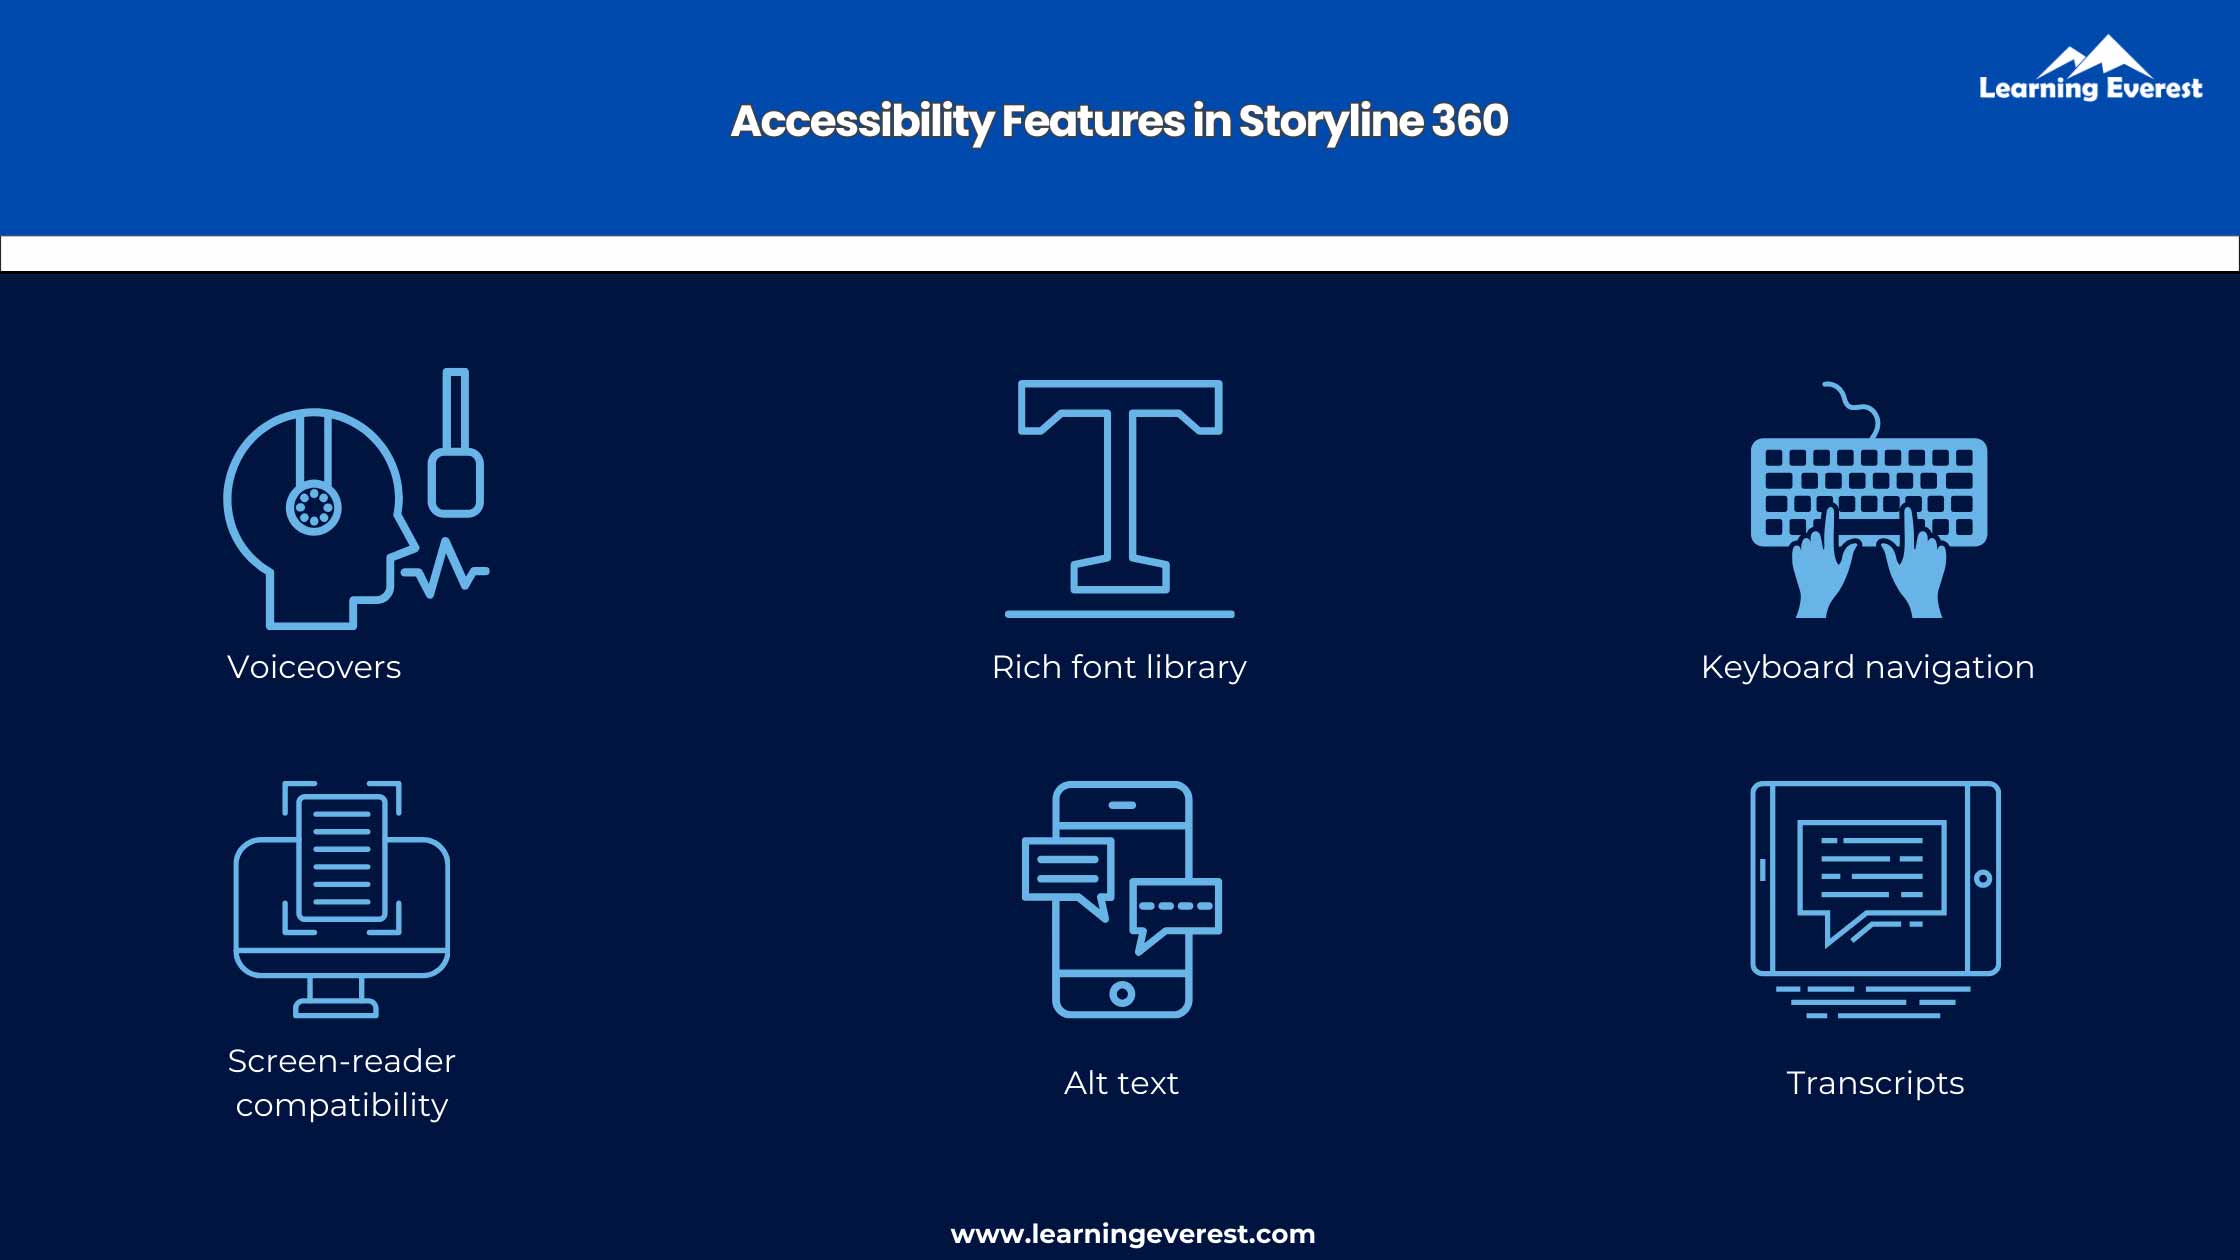 Accessibility Features in Storyline 360